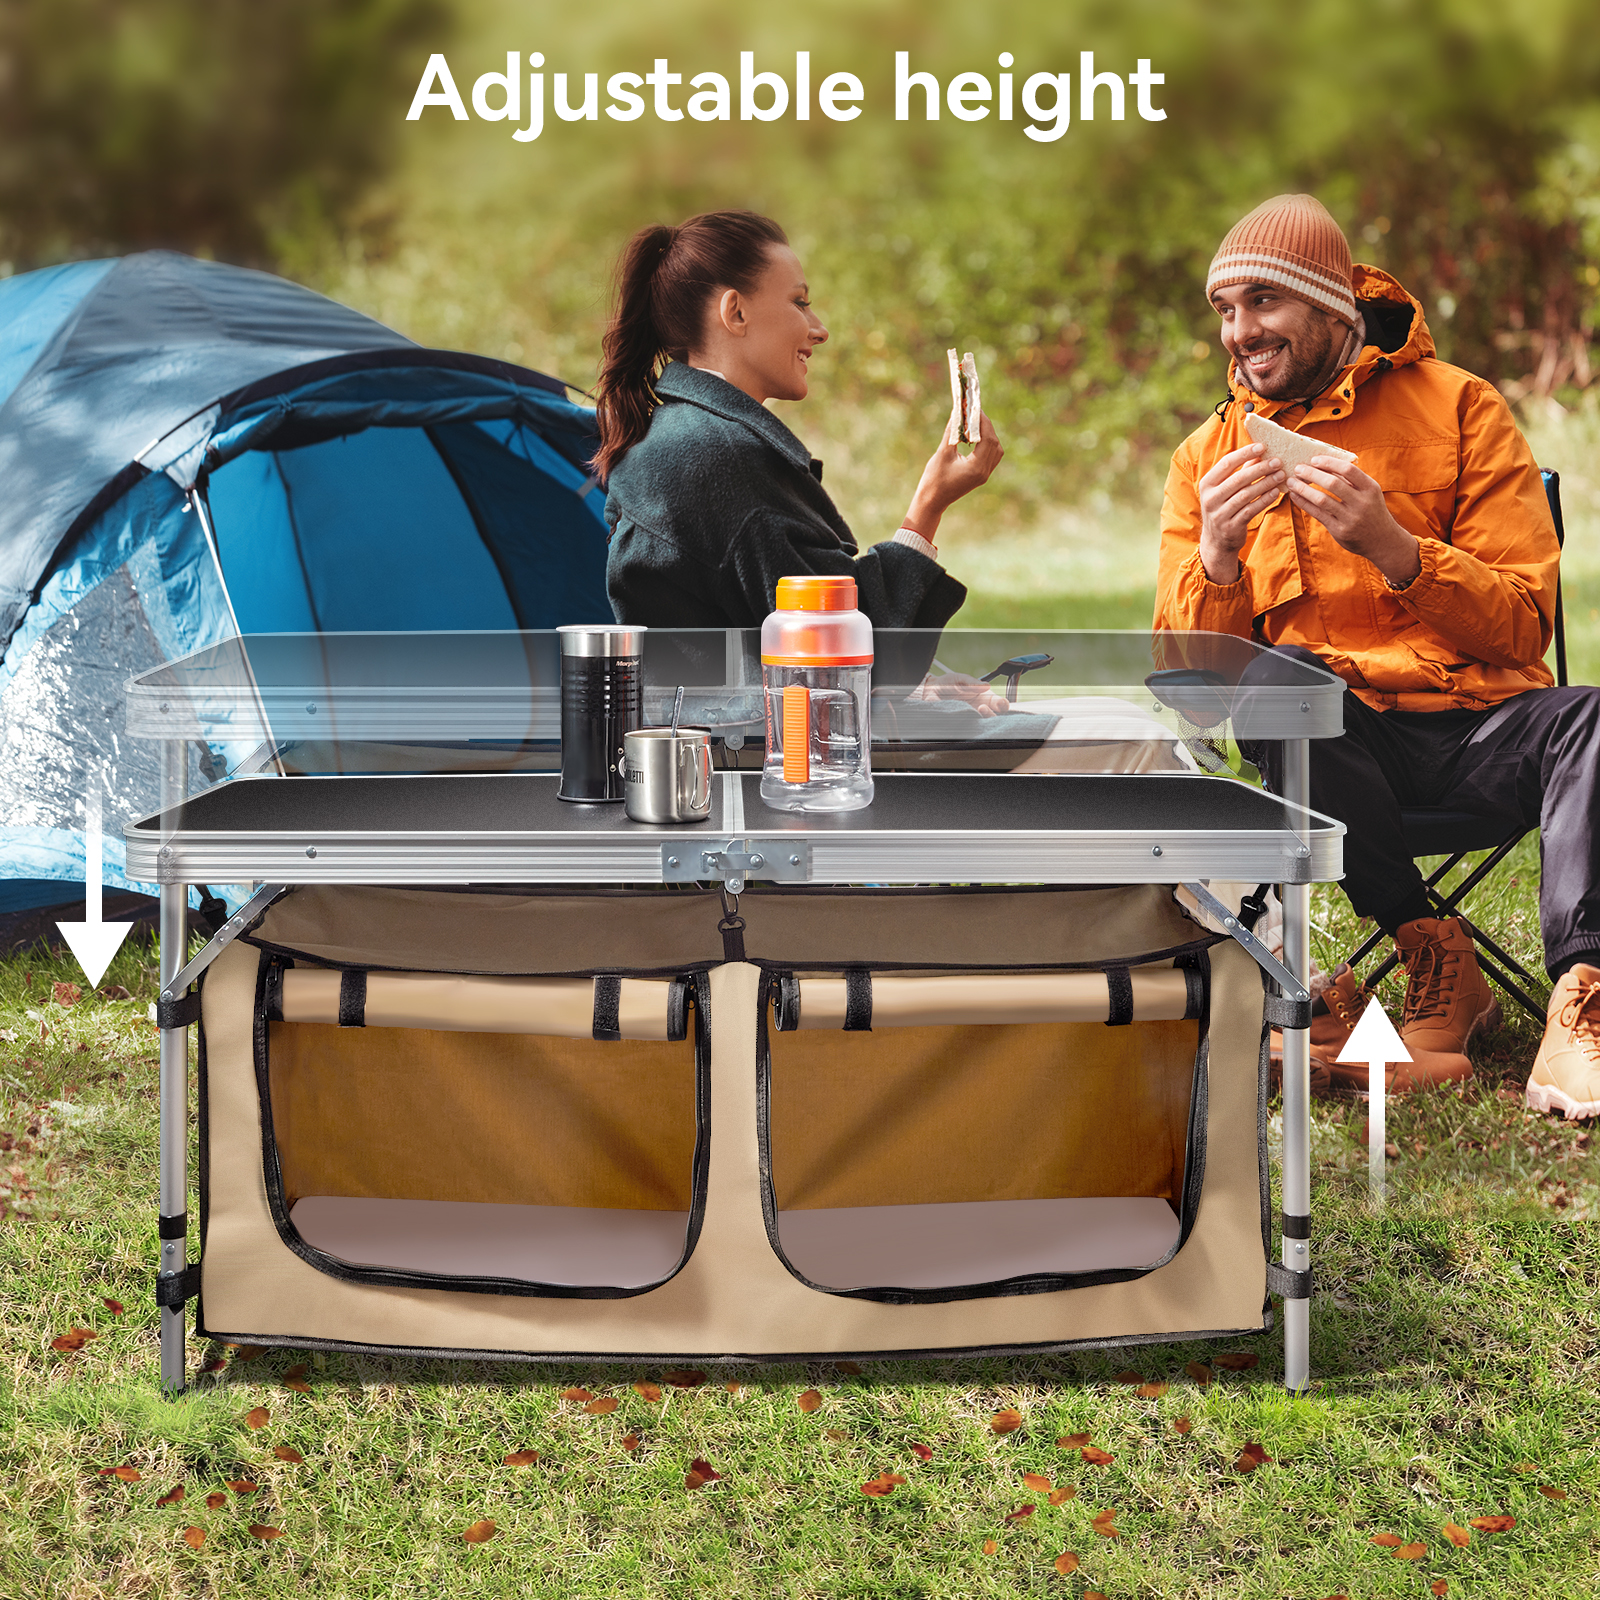 Folding Camping Table Set, VECUKTY Camping Kitchen Station, Aluminum Portable Folding Camp Cook Table with Storage Organizer and 2 Adjustable Feet,1 Folding Trash Can, Gray - image 4 of 9